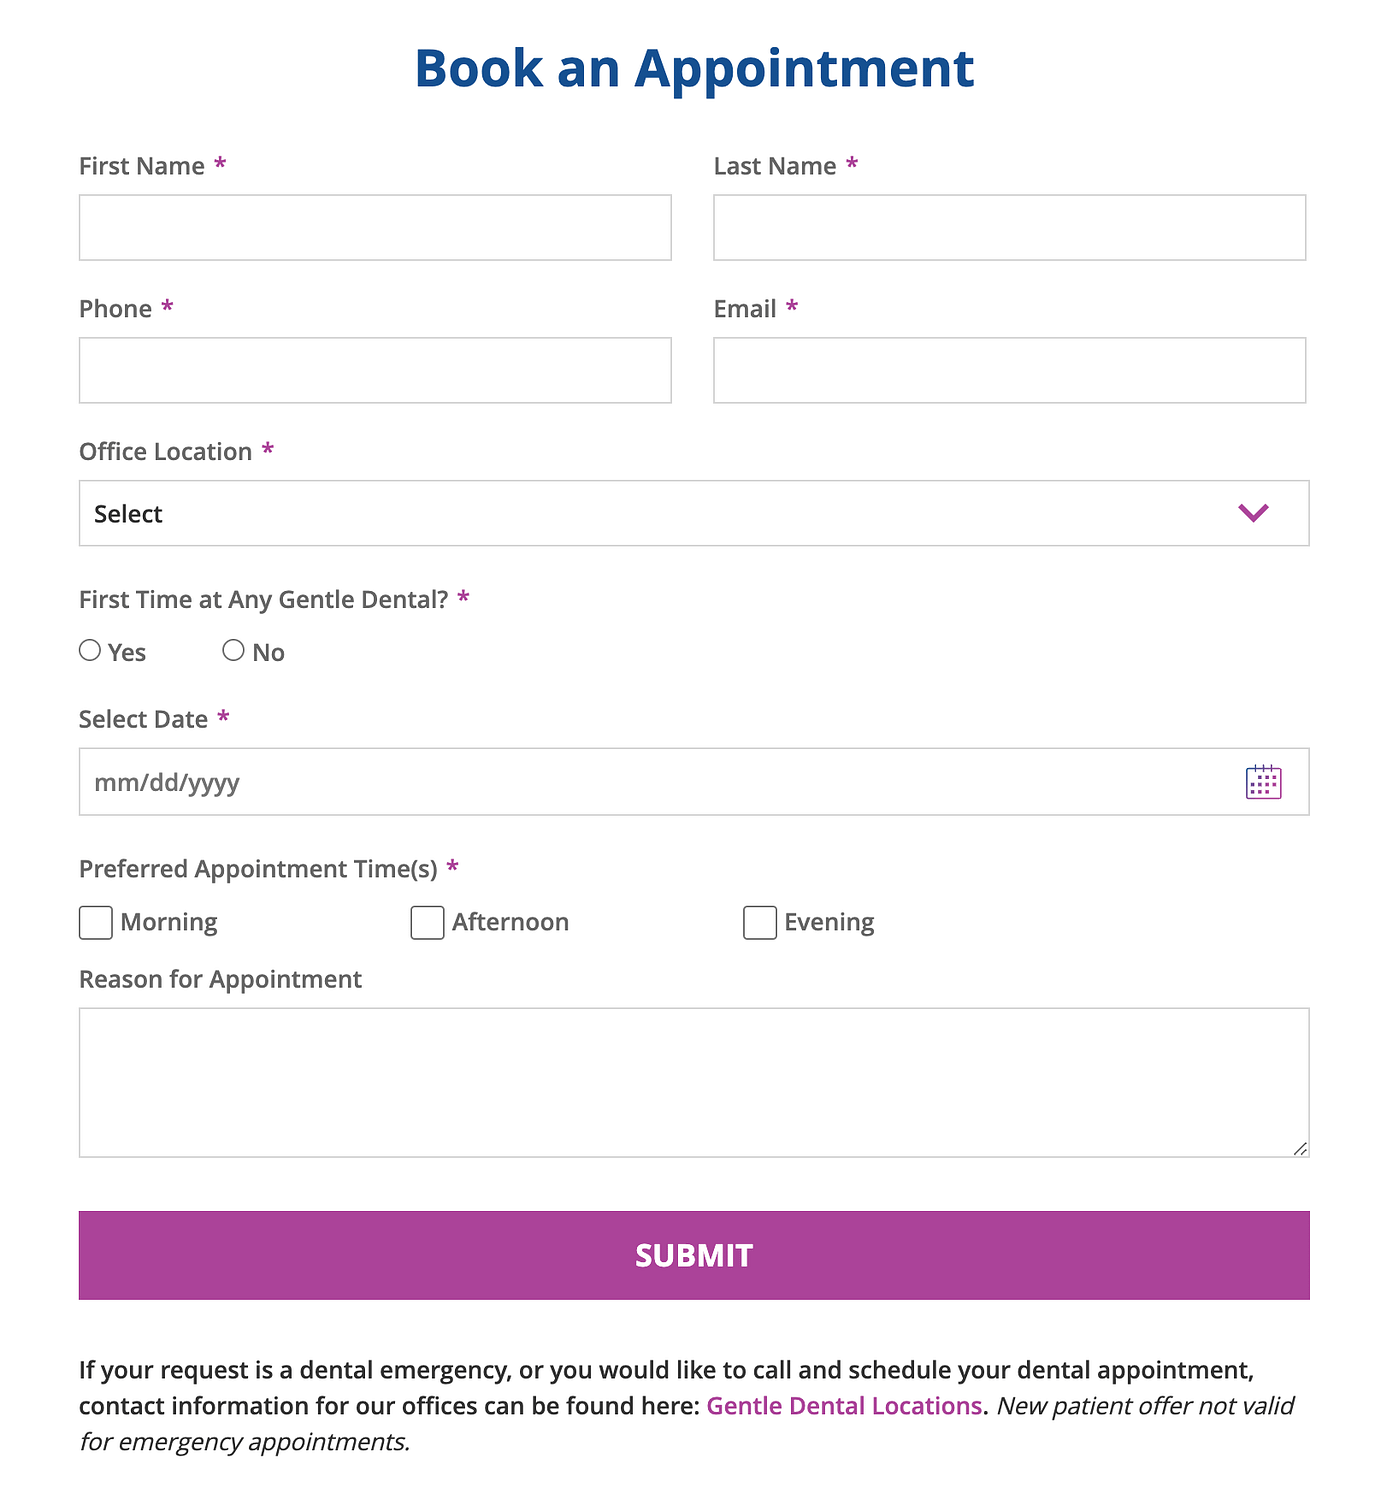 Appointment booking